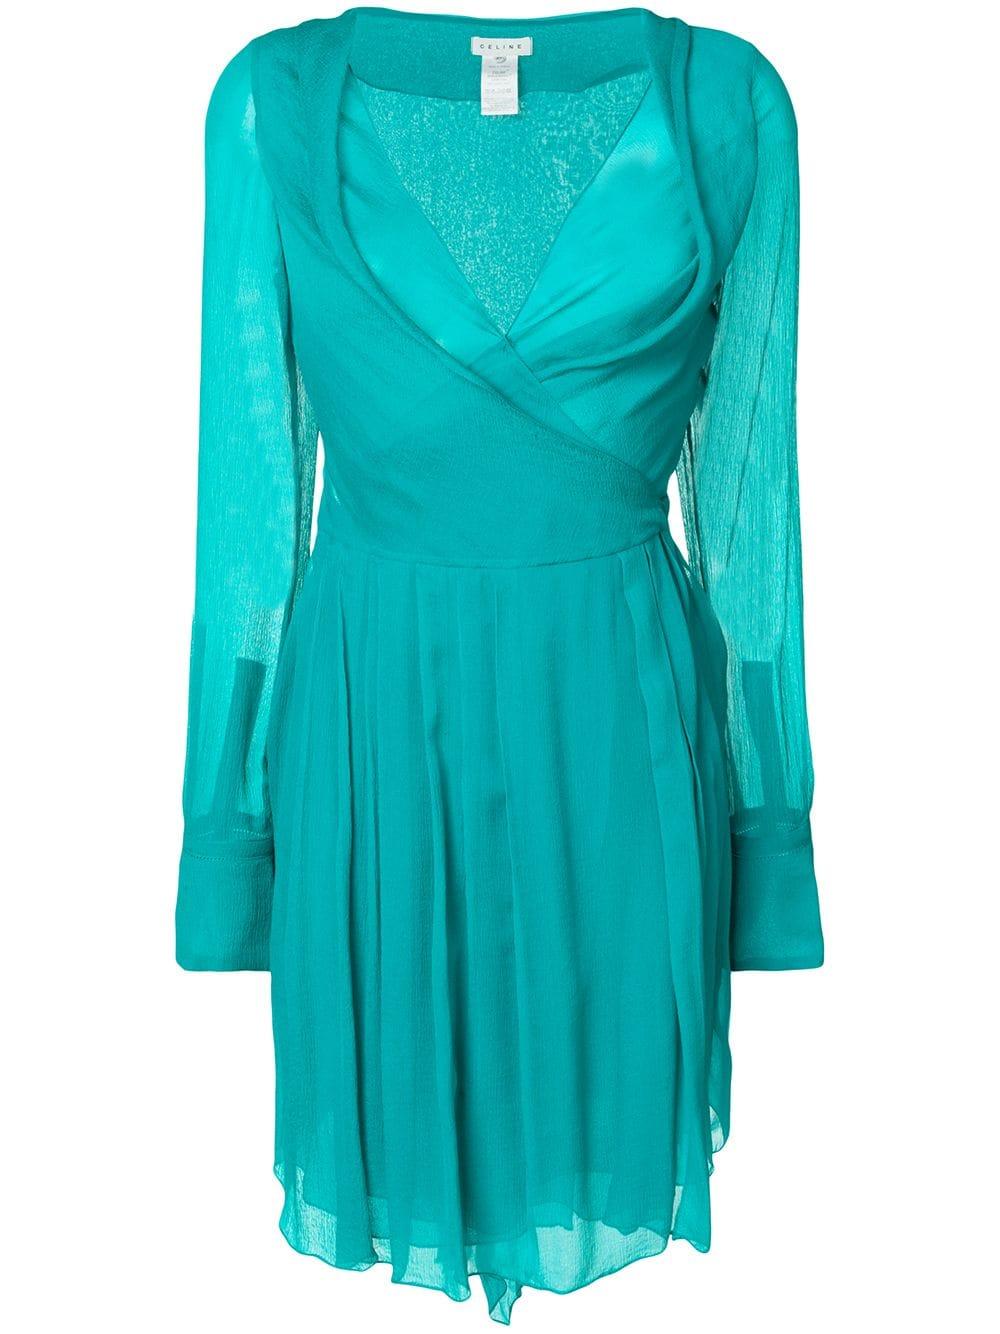 Celine Paris  green silk chiffon wrap cocktail dress featuring a long tie belt, a short length. 
100% silk
Estimated size 38fr/US8/UK12
We guarantee you will receive this gorgeous item as described and showed on photos. (please enlarge images to see